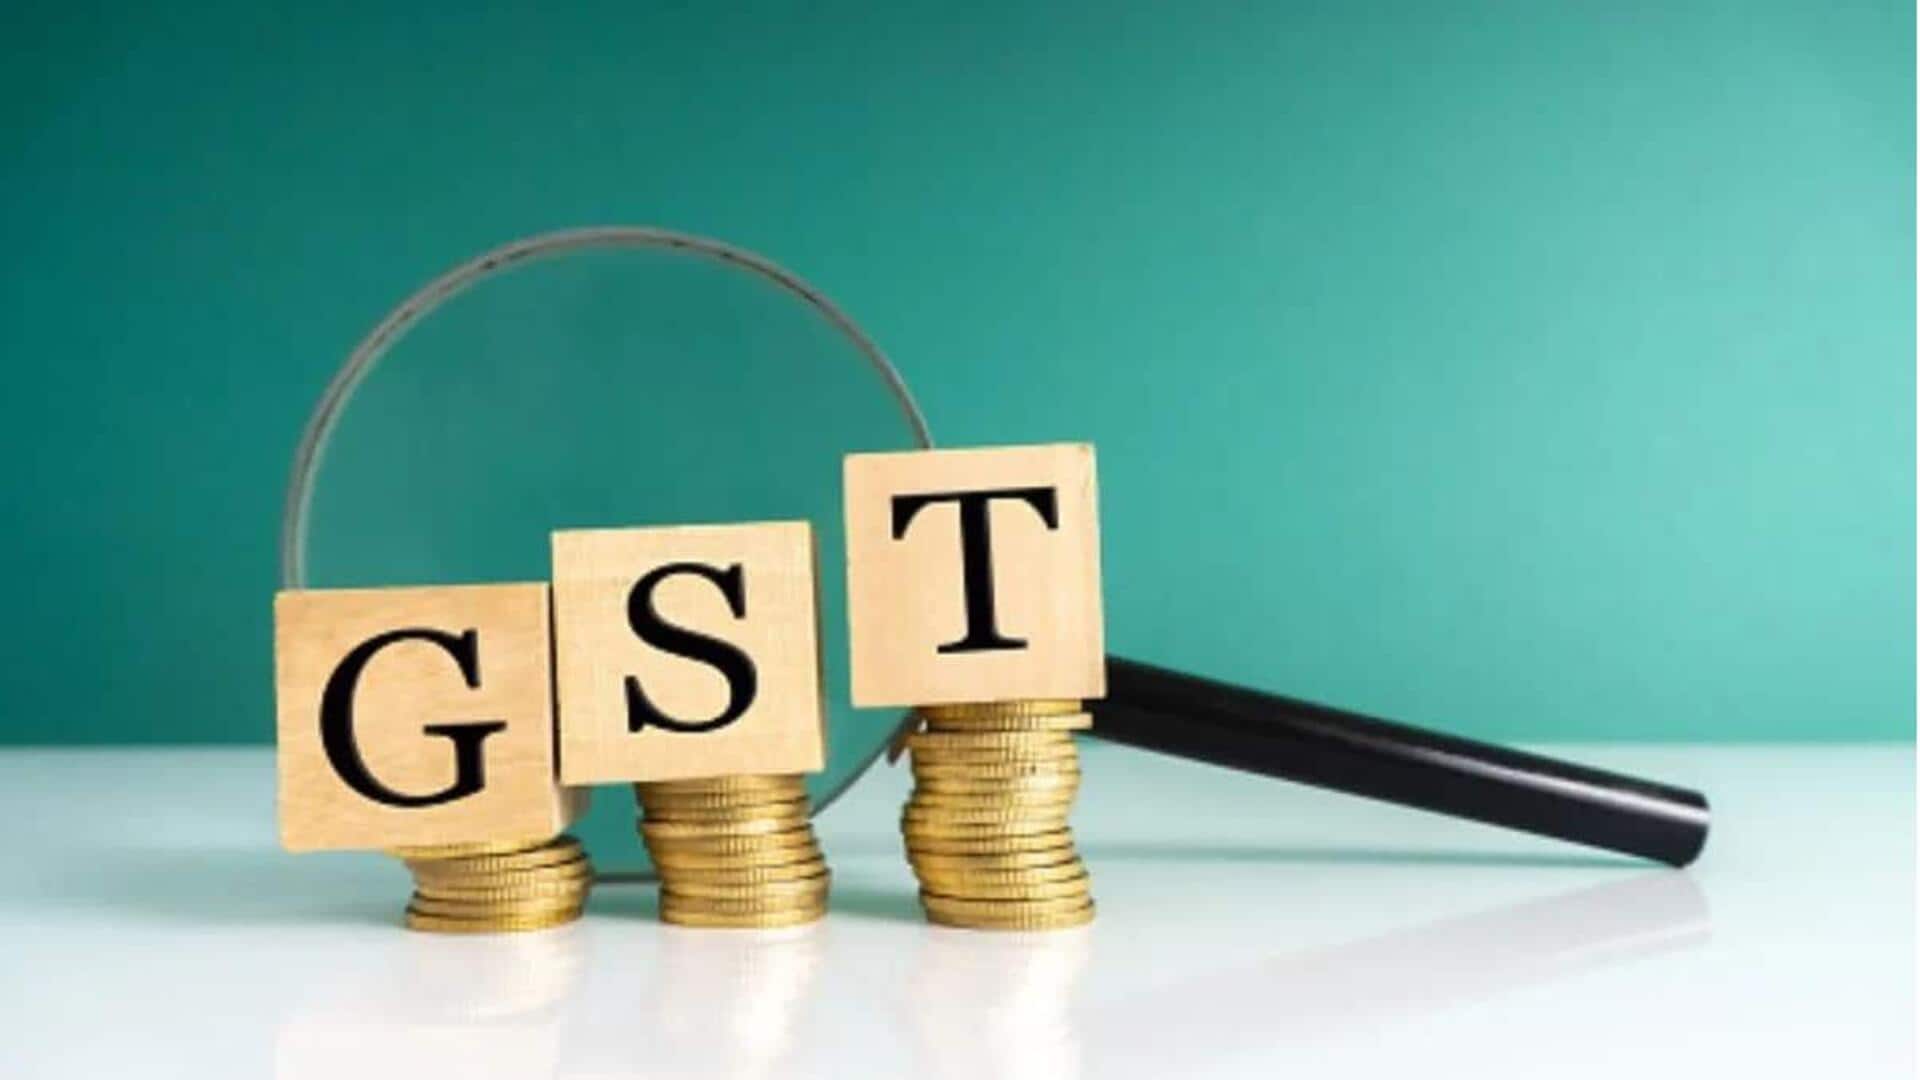 October GST collection touches second-highest ever at Rs. 1.72L crore